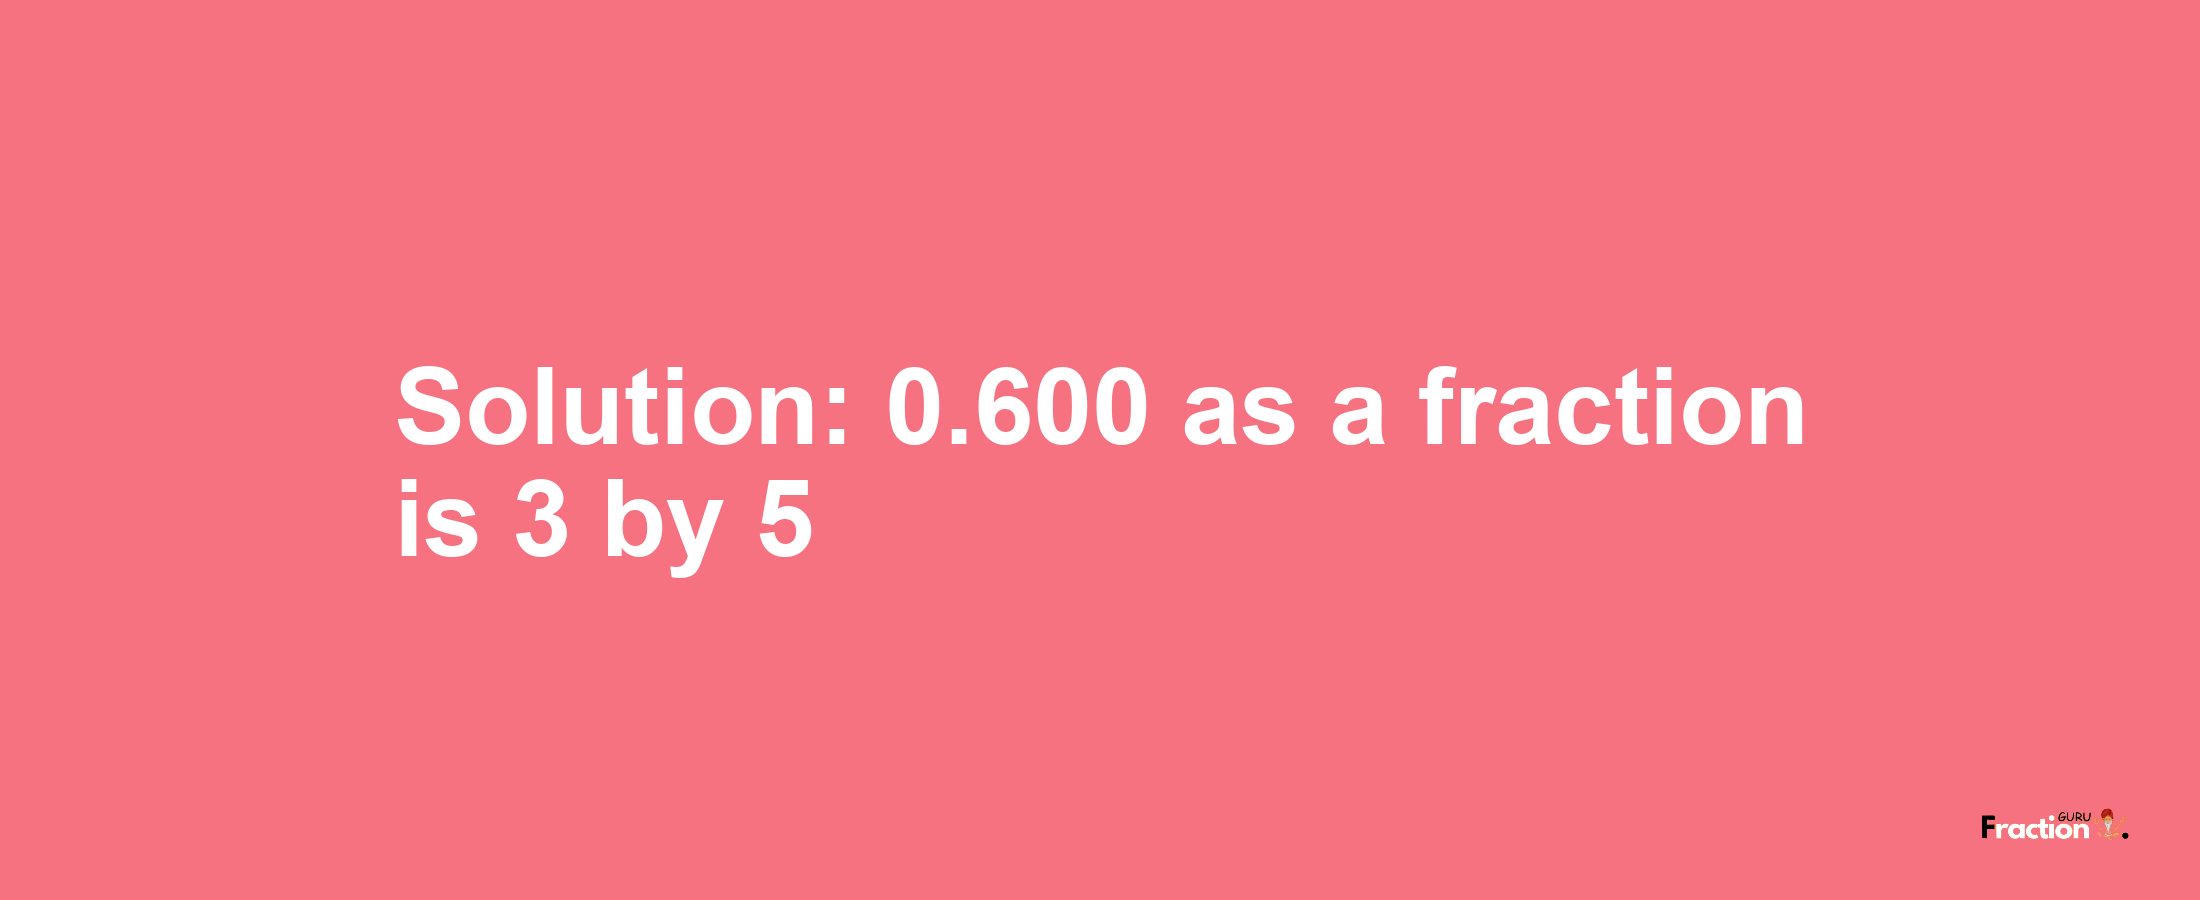 Solution:0.600 as a fraction is 3/5